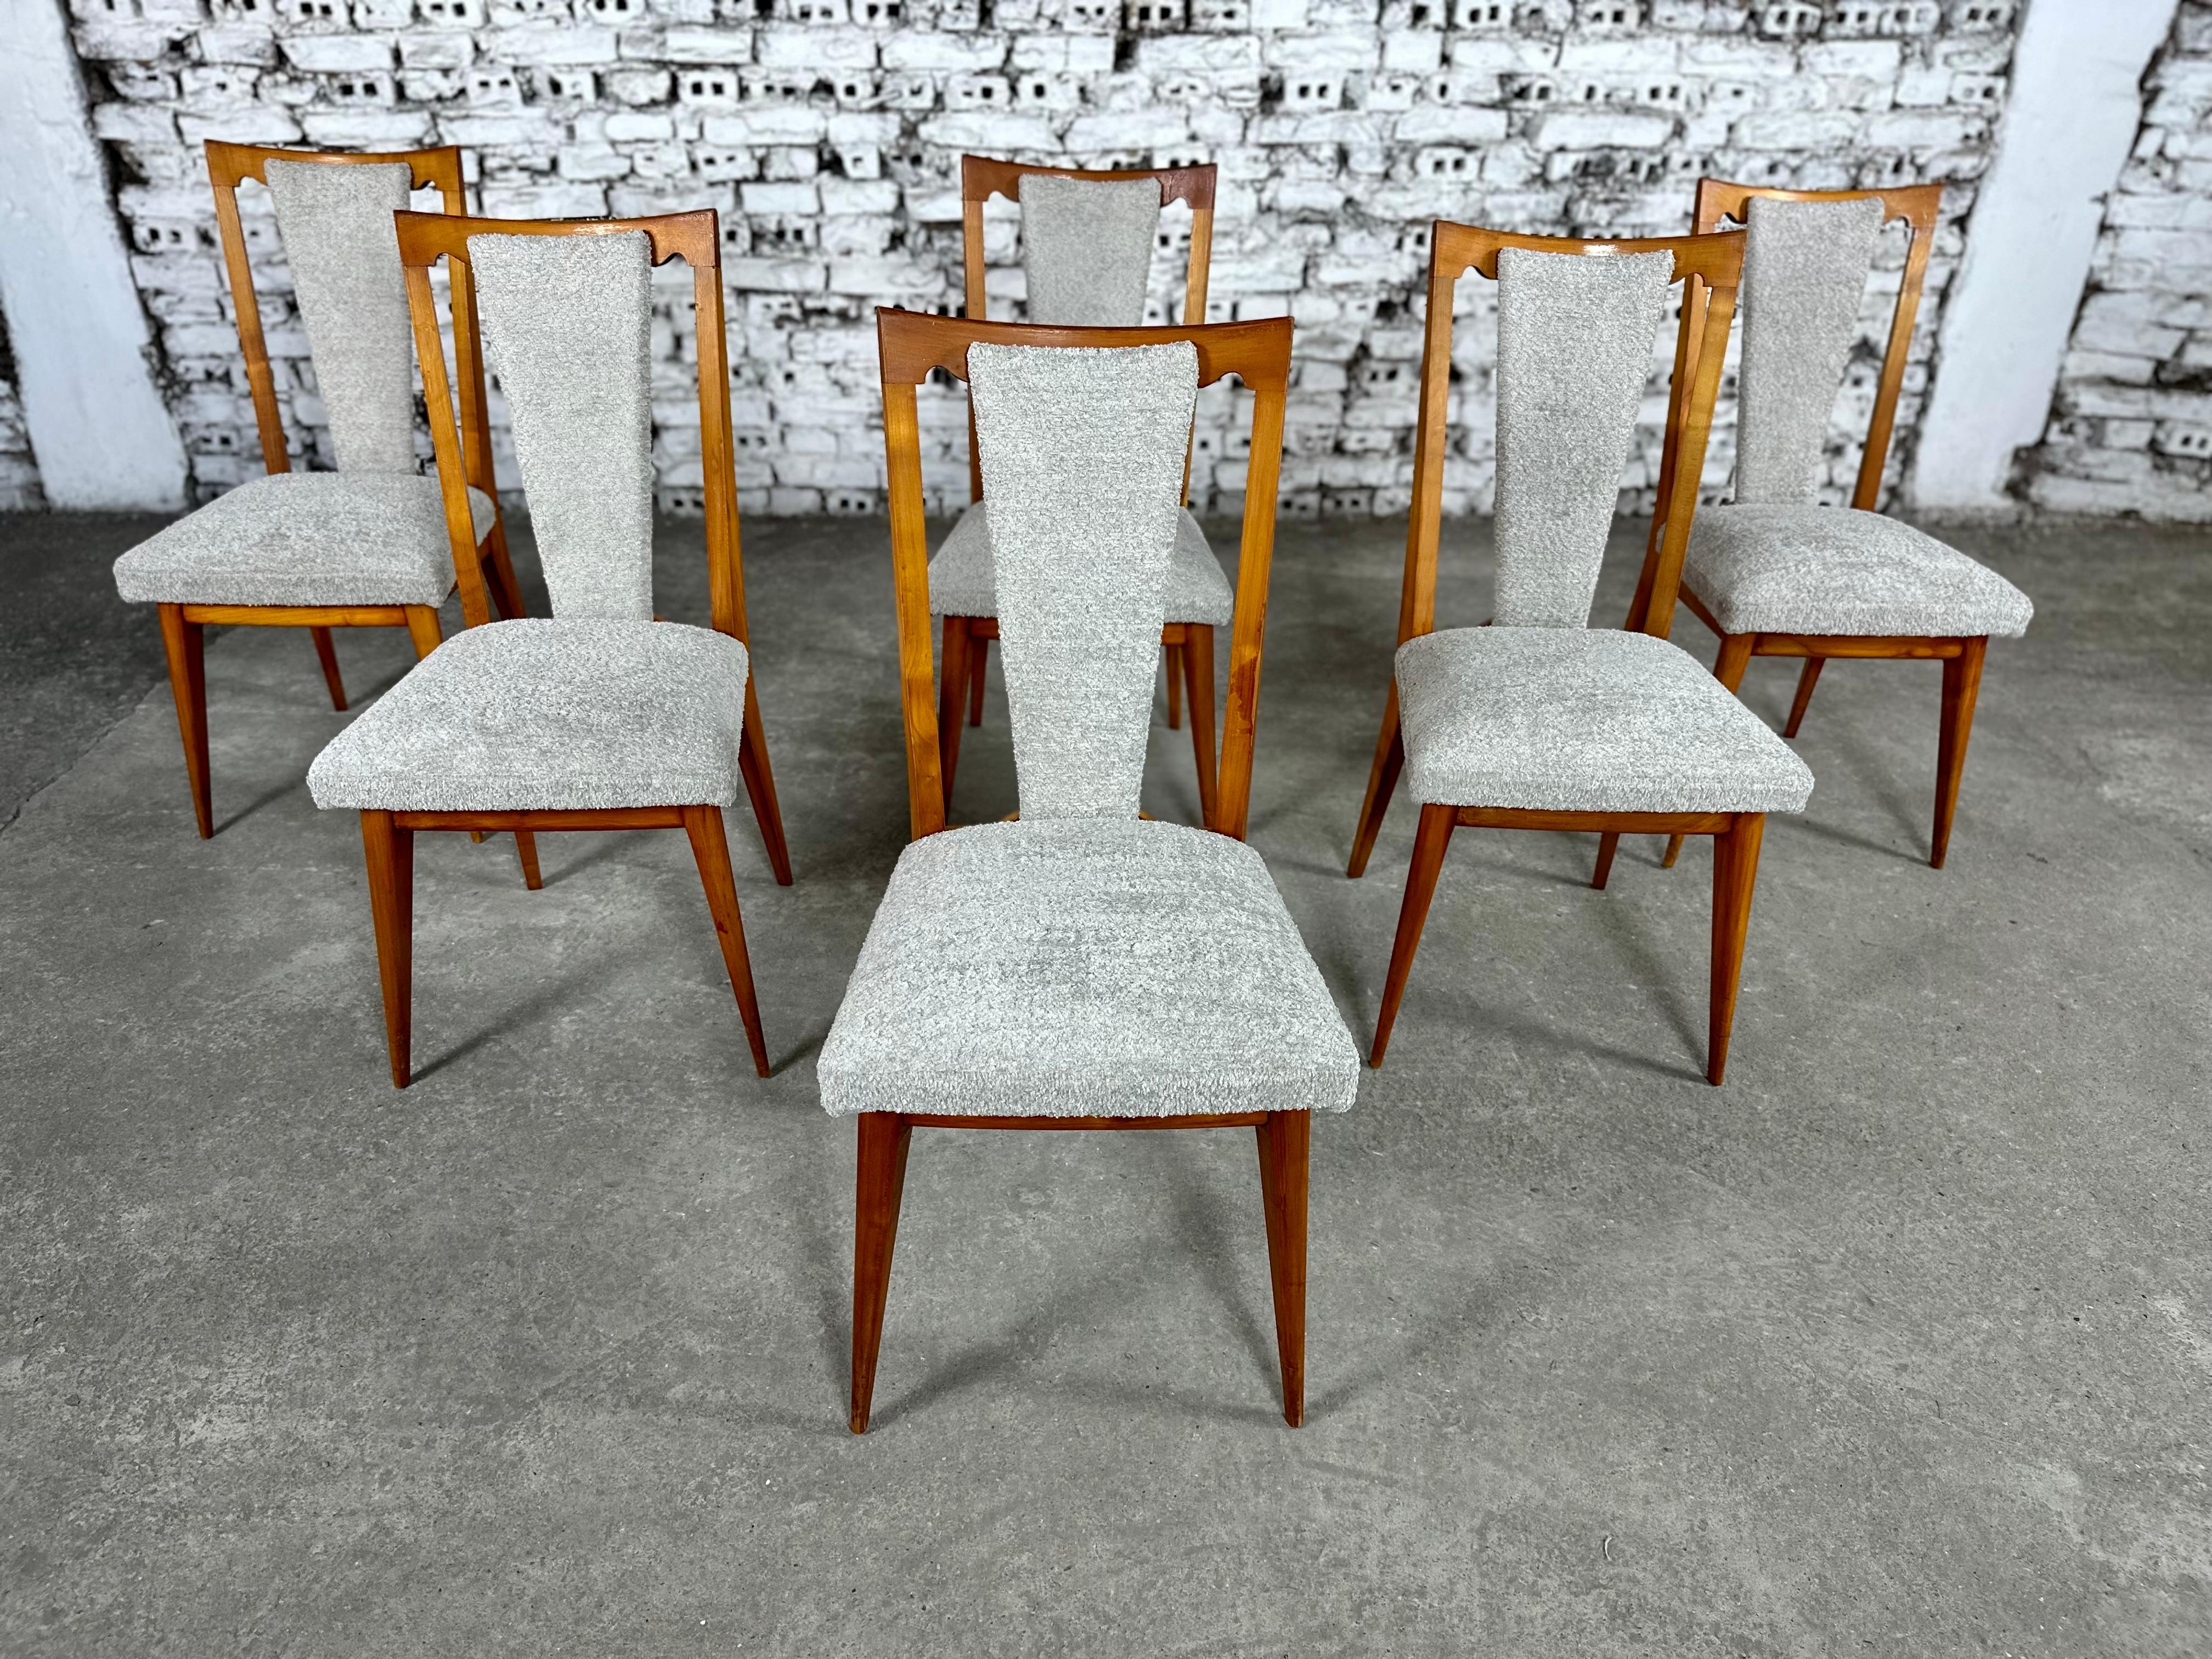 French Art Deco Styled Dining Chairs, Newly Upholstered - Set of 6 For Sale 1